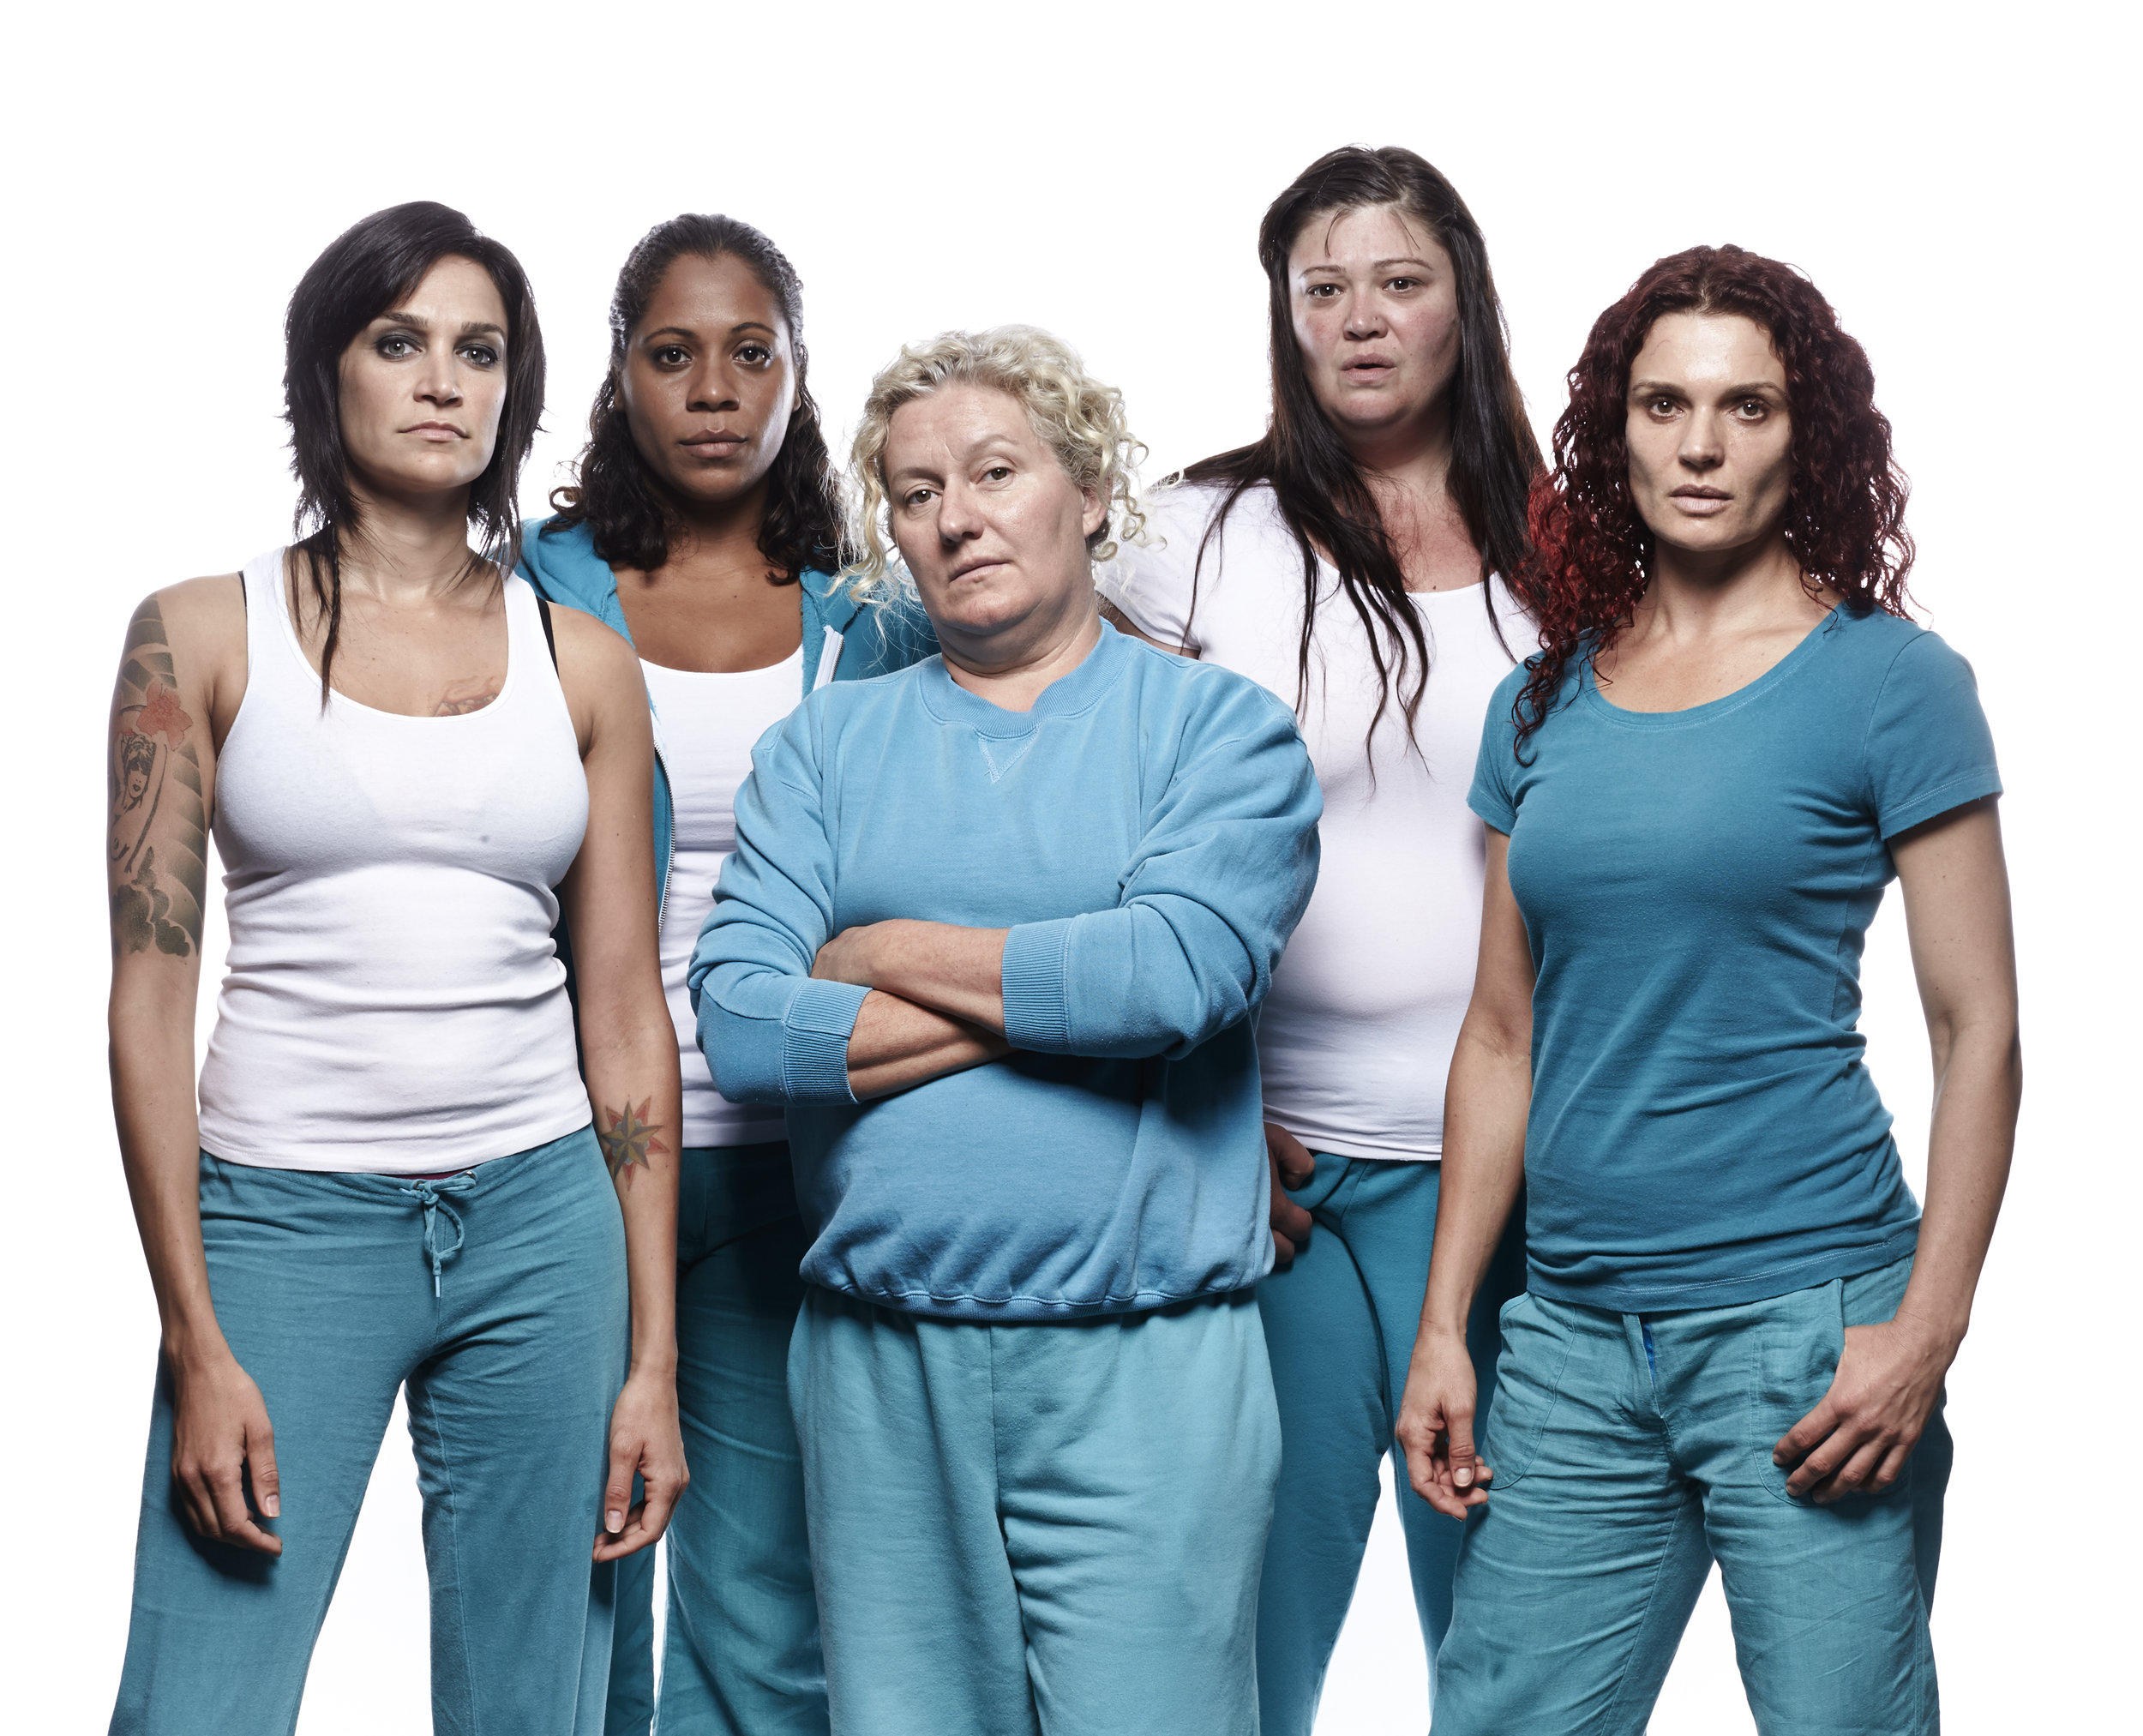   The ladies of Wentworth  Image - Foxtel 